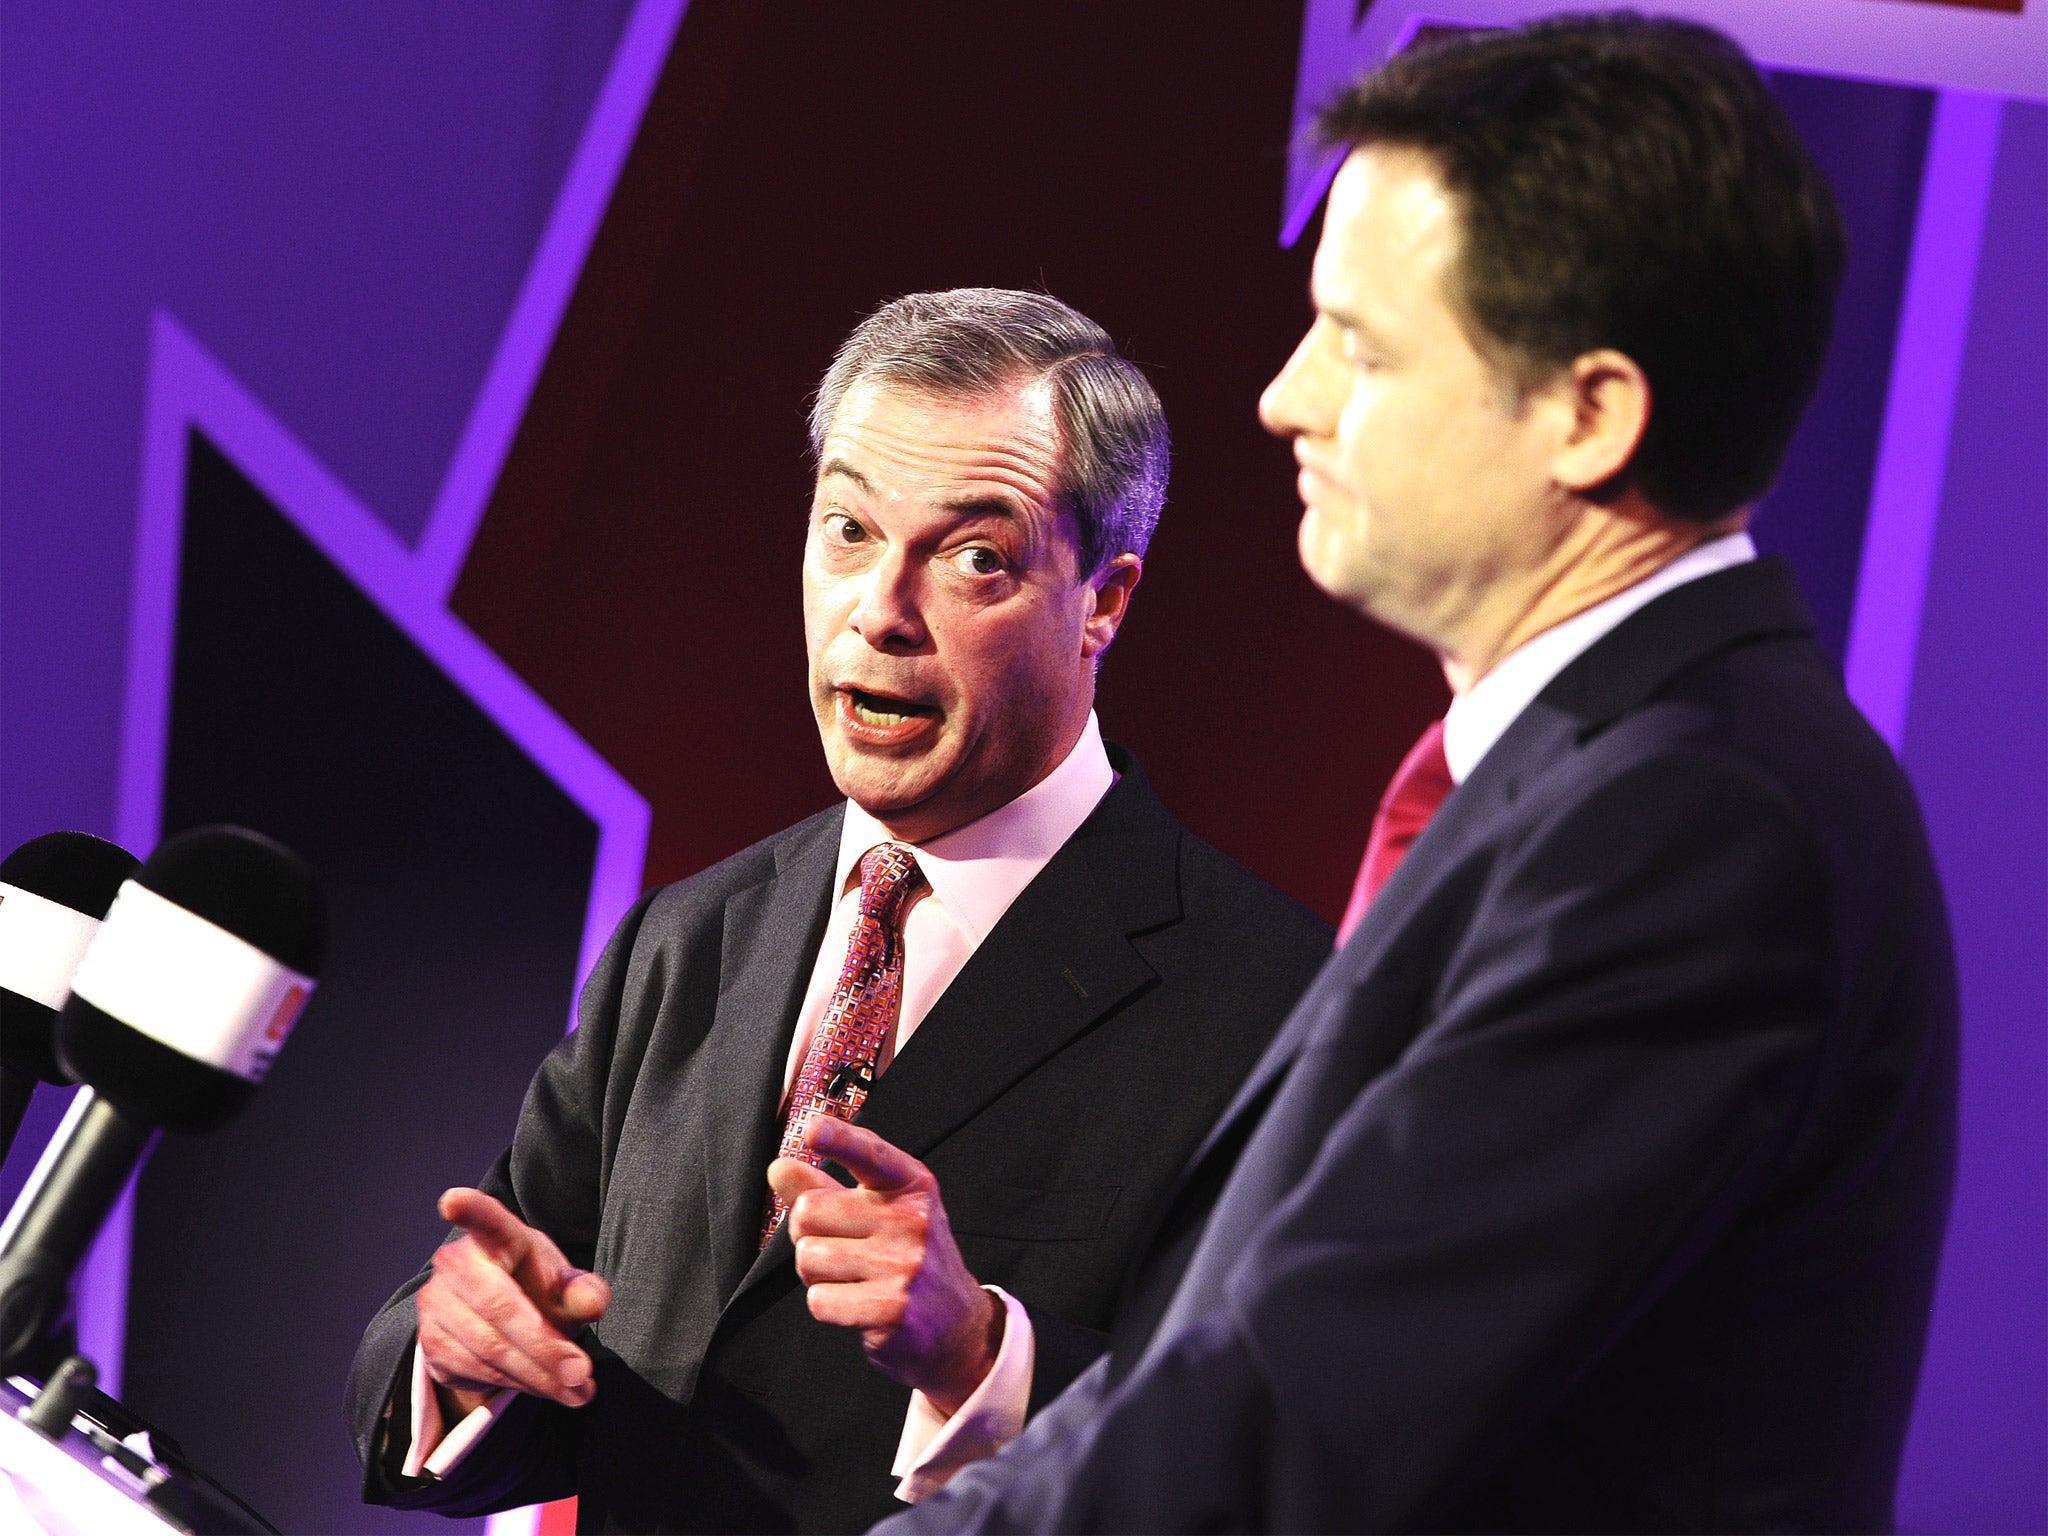 Farage and Clegg will go head-to-head again tonight